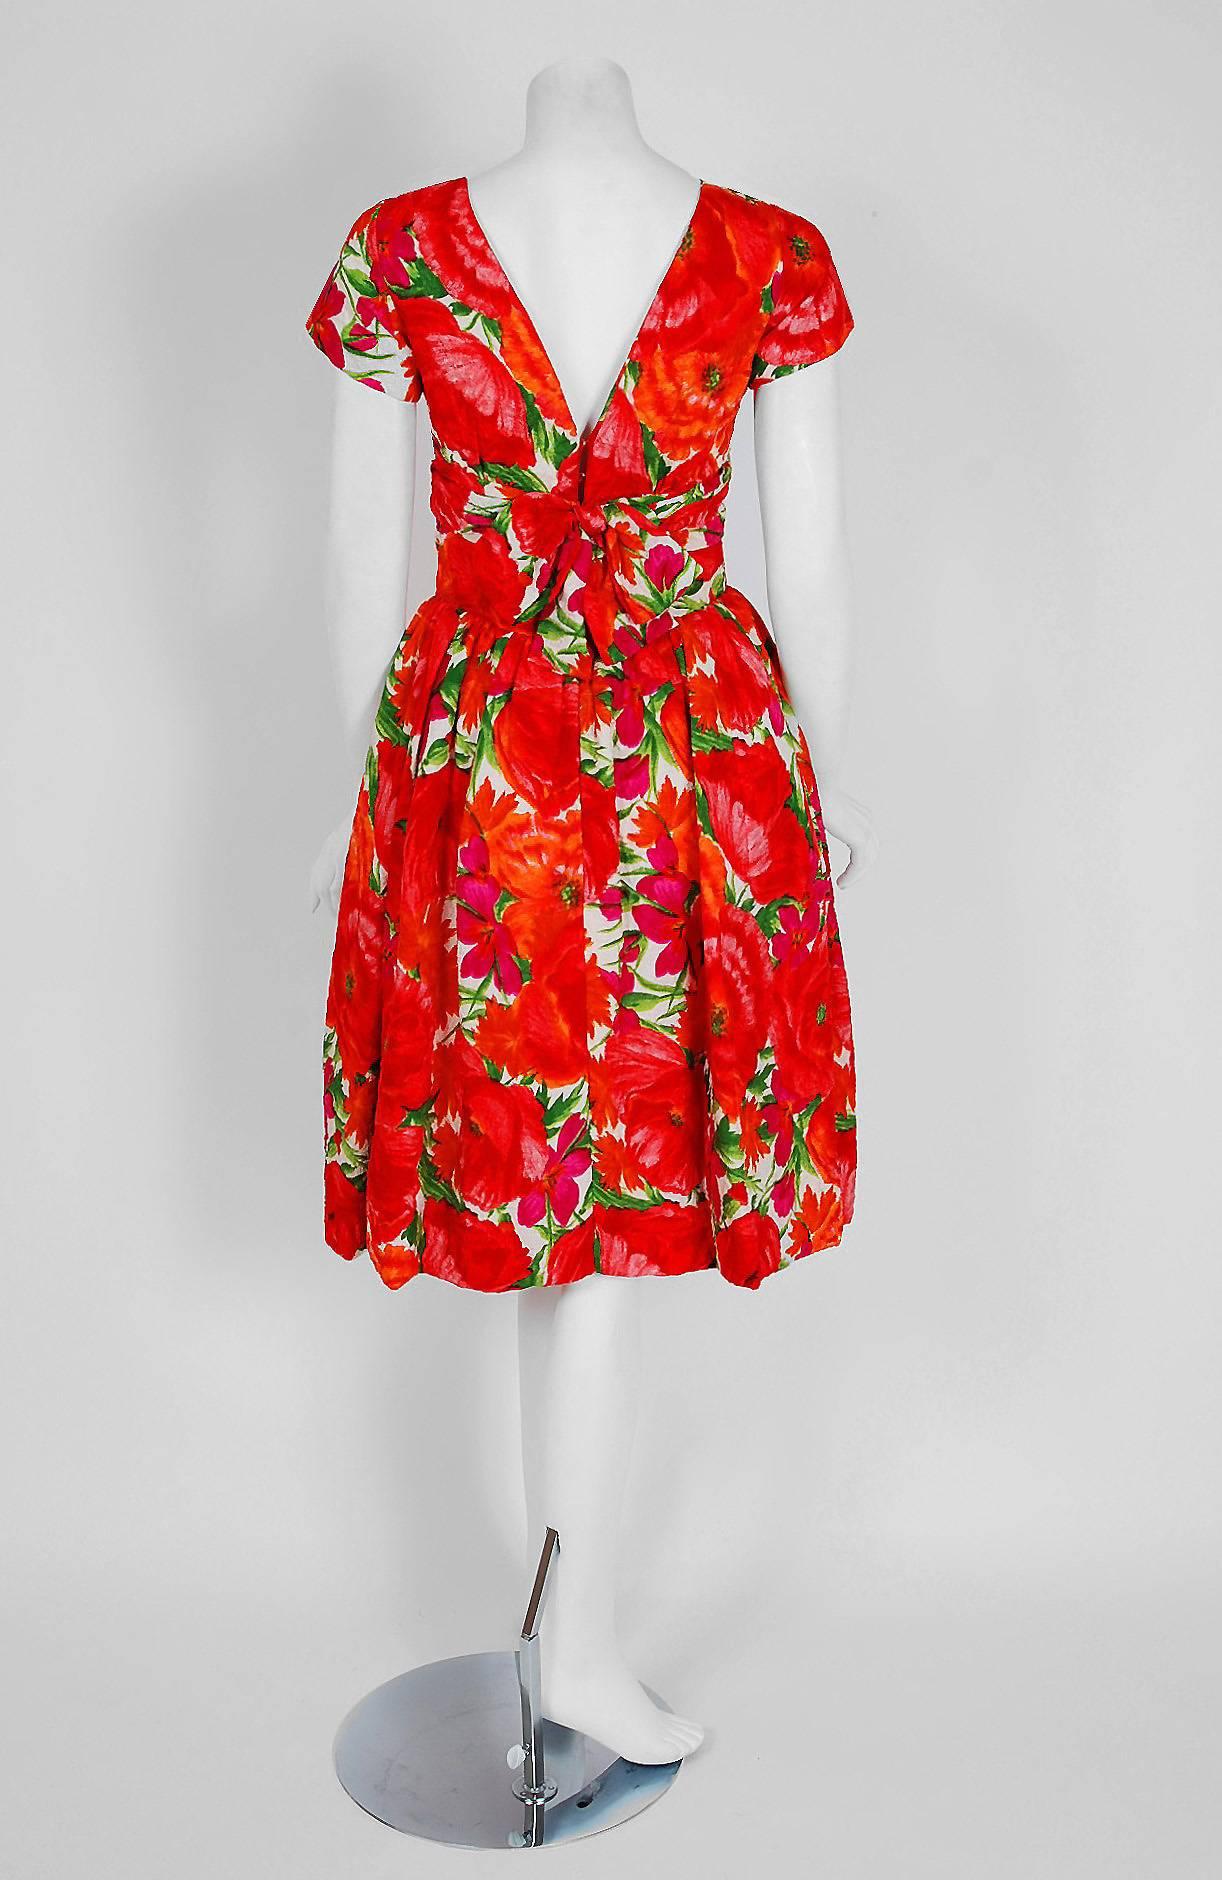 Women's 1958 Christian Dior New York Red-Roses Floral Garden Silk Back-Bow Party Dress